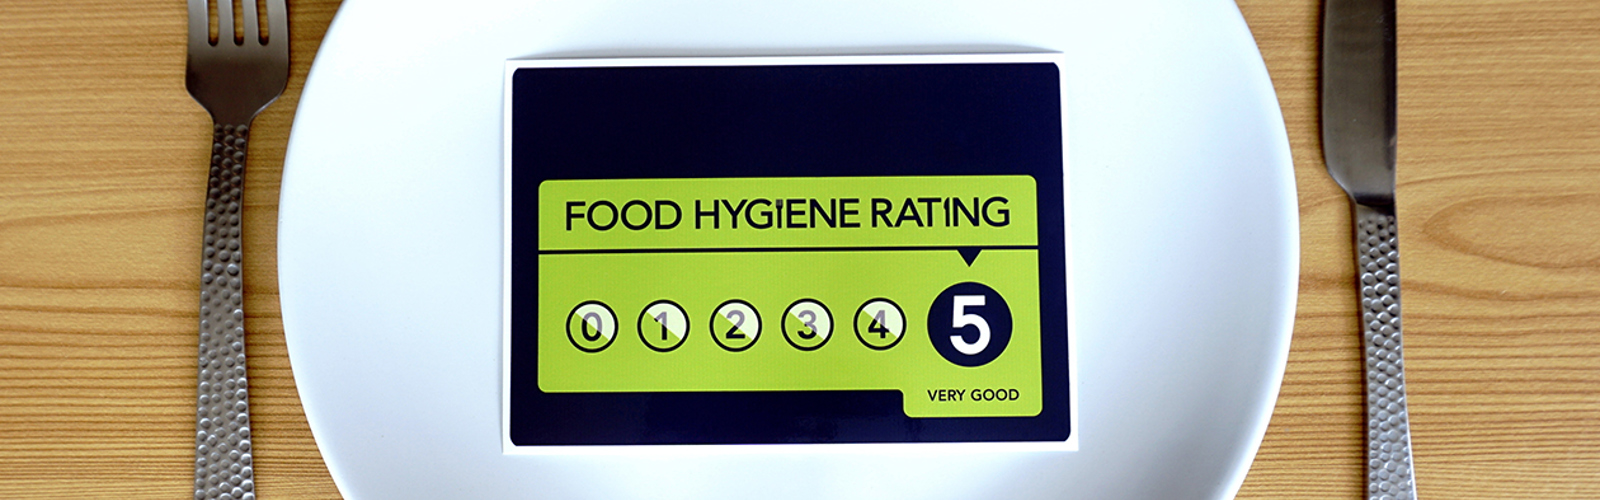 Food hygiene rating scheme sticker on a plate with cutlery at the sides